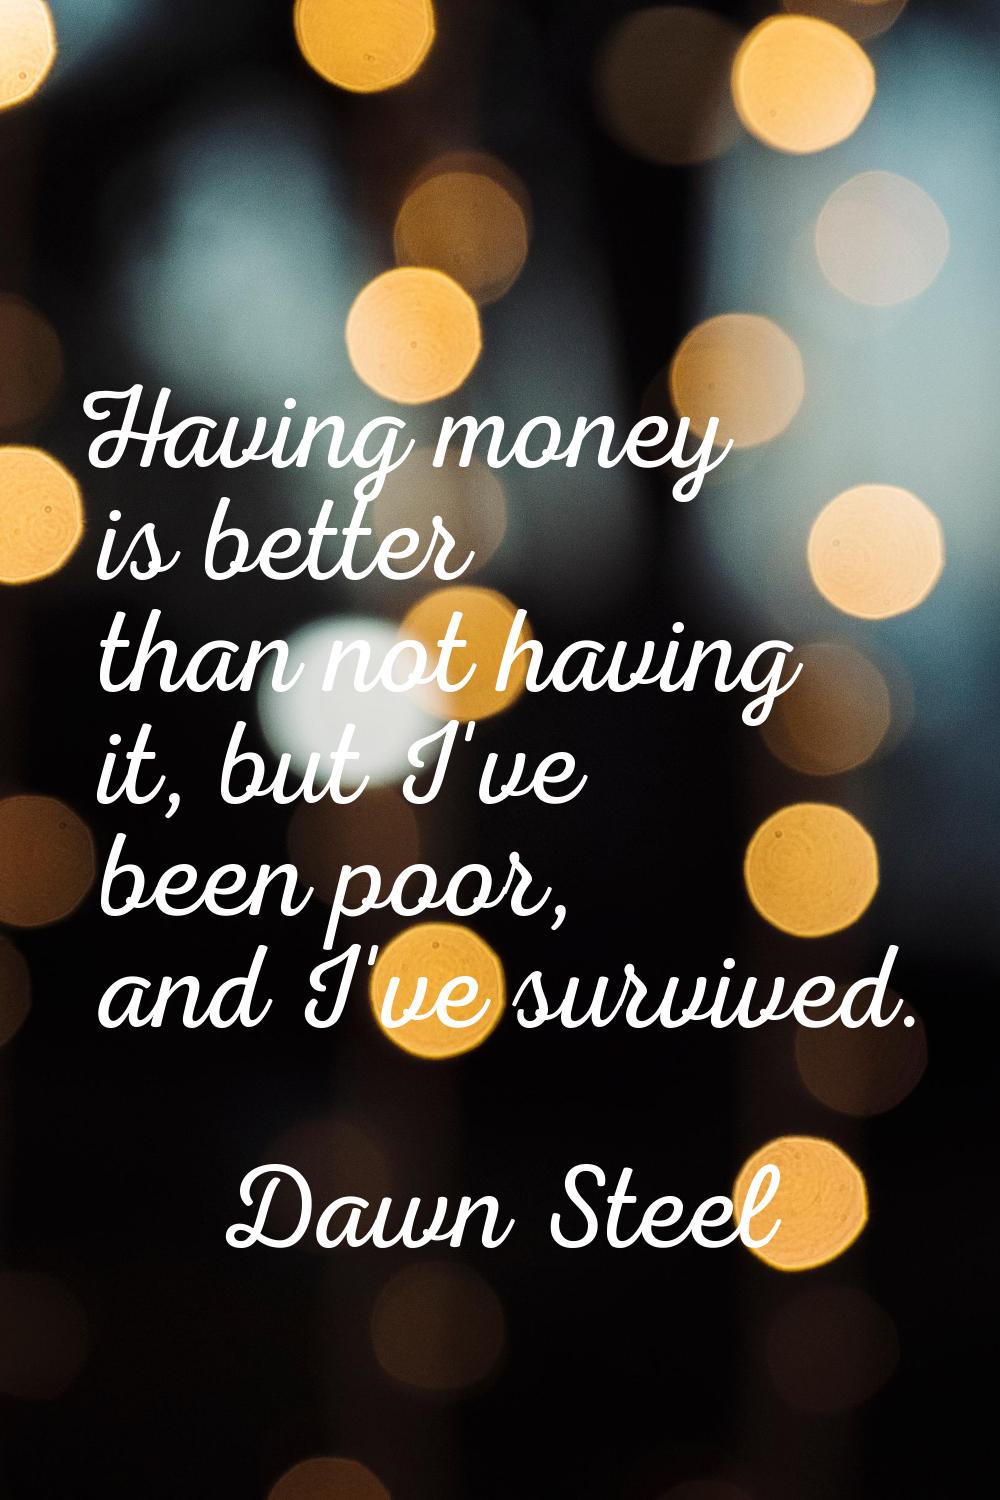 Having money is better than not having it, but I've been poor, and I've survived.